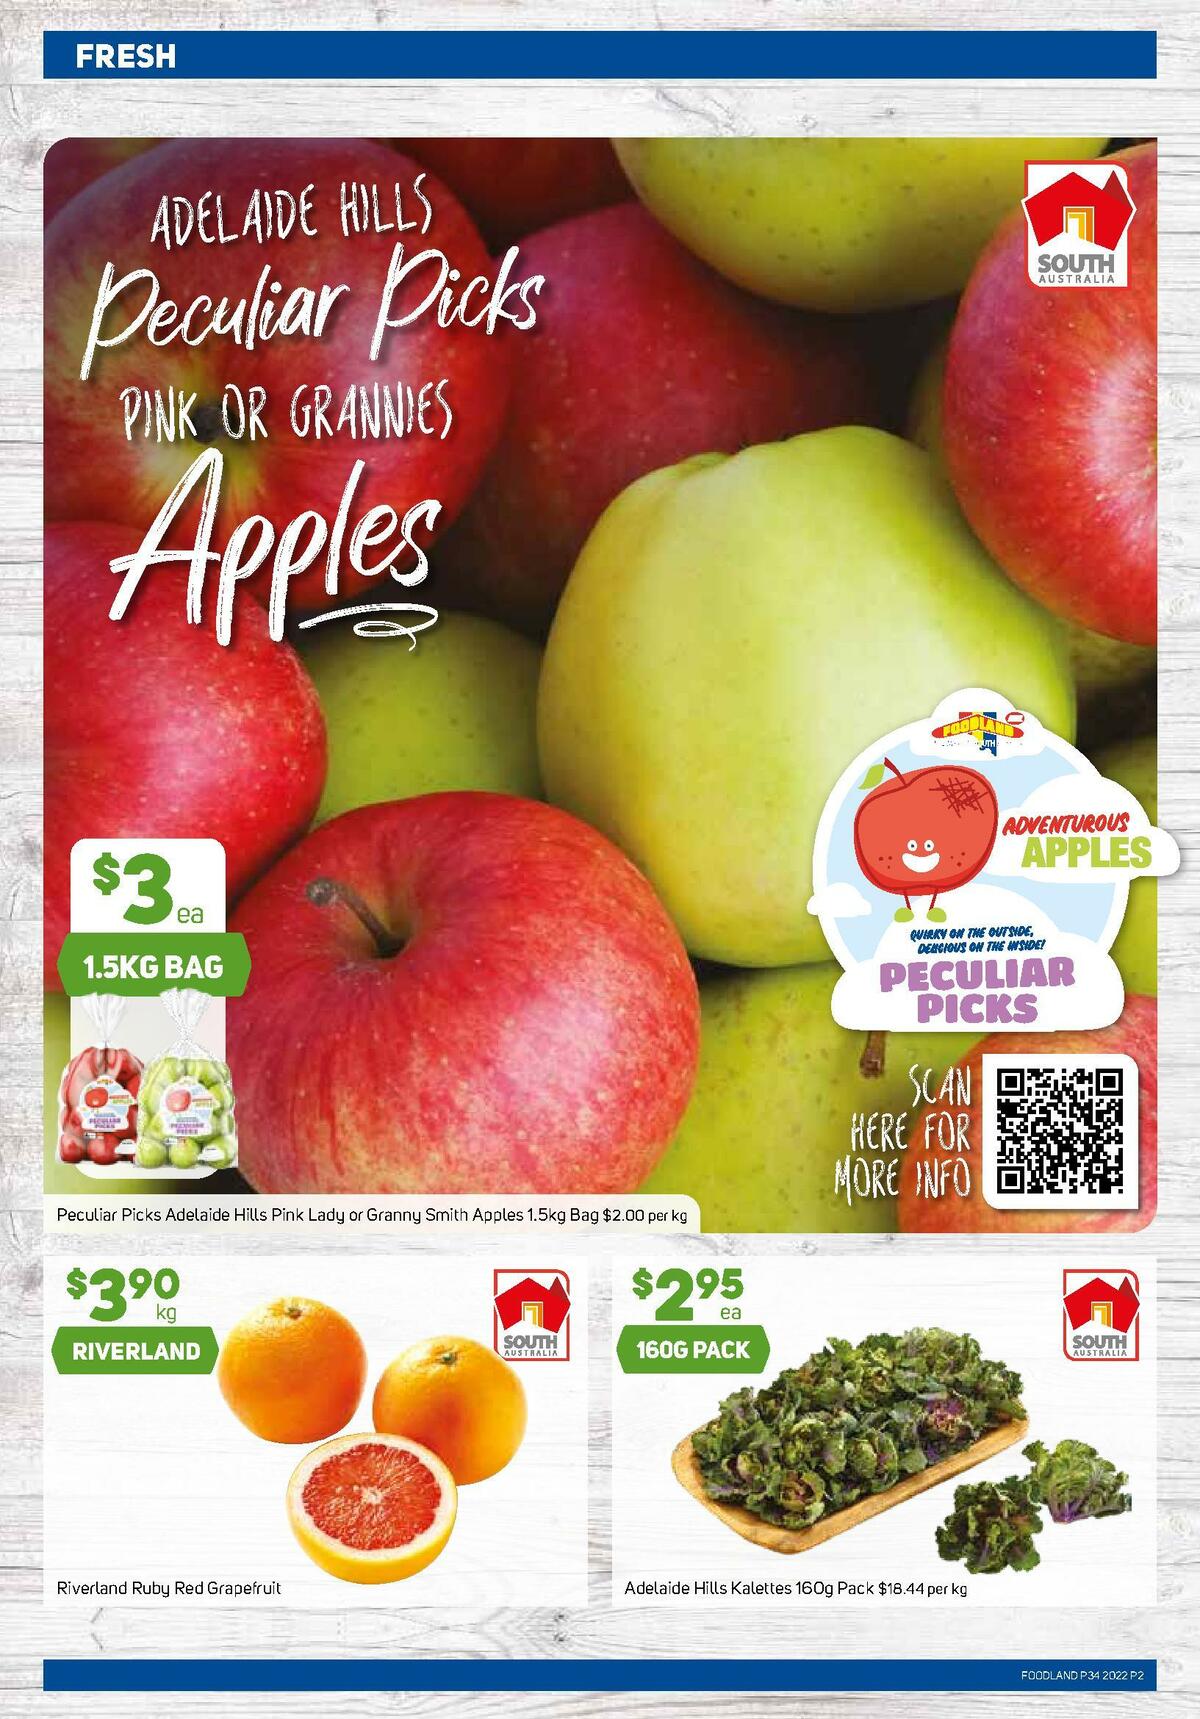 Foodland Catalogues from 24 August